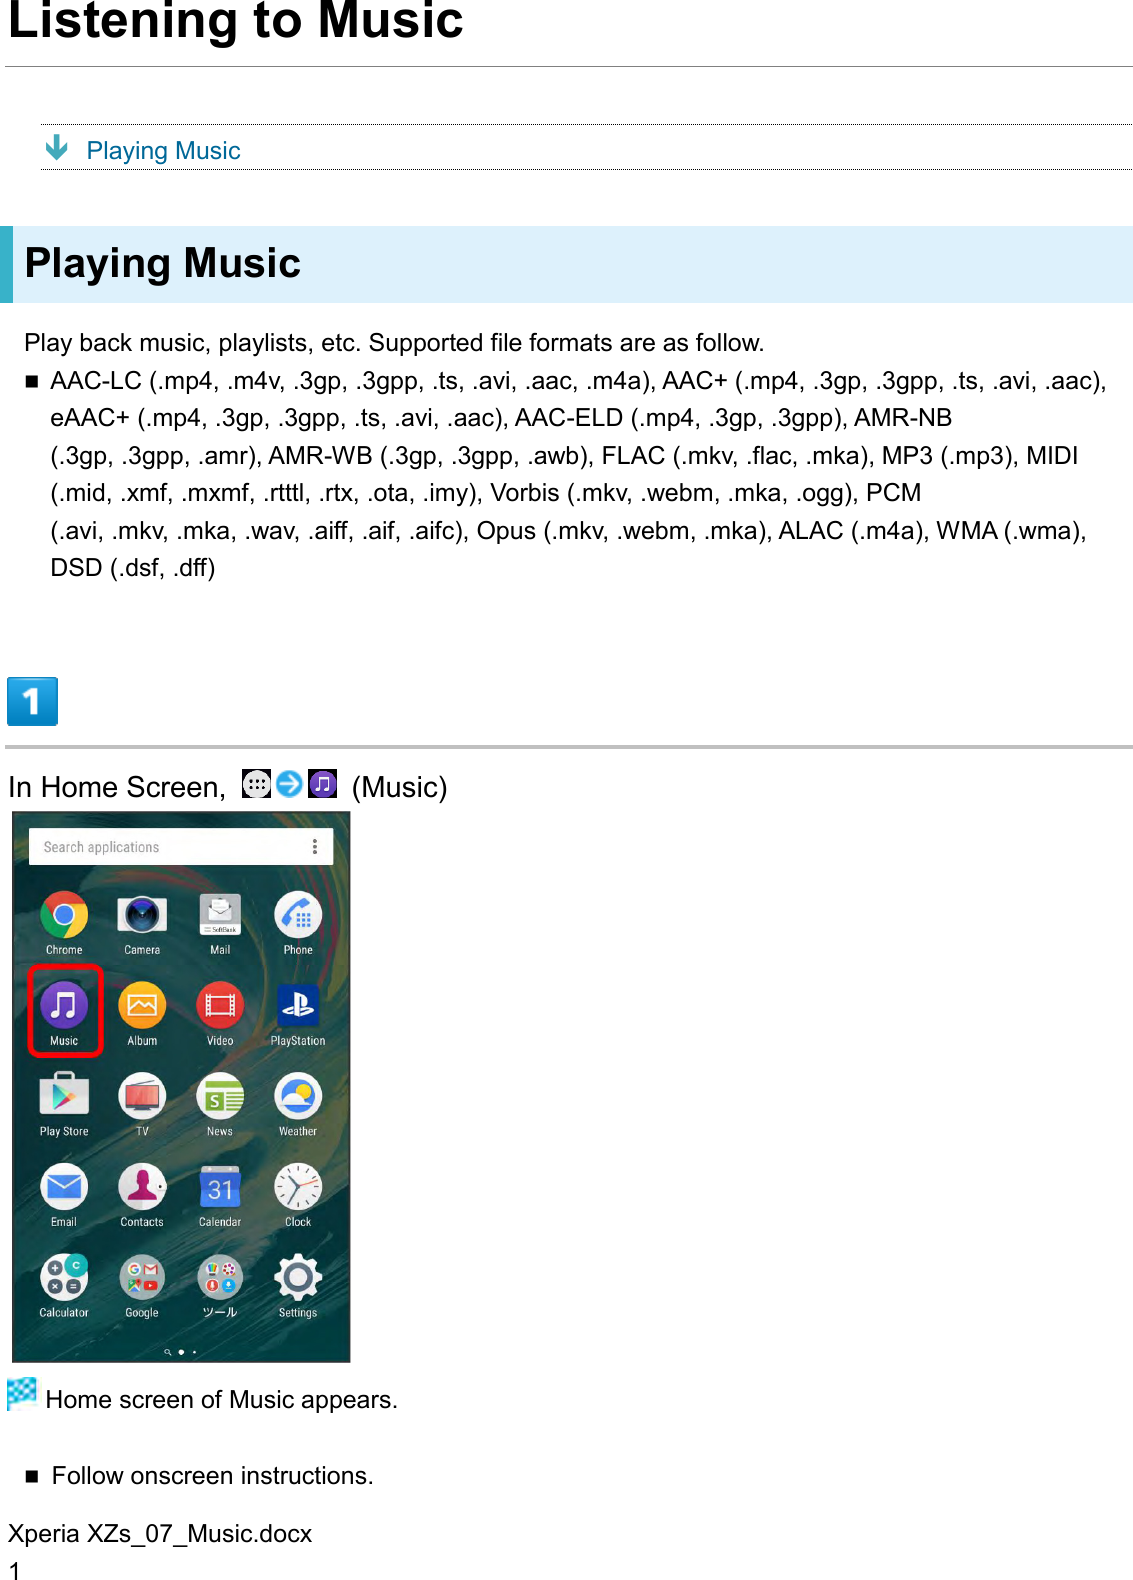 Xperia XZs_07_Music.docx 1 Listening to Music  Playing Music Playing Music Play back music, playlists, etc. Supported file formats are as follow.  AAC-LC (.mp4, .m4v, .3gp, .3gpp, .ts, .avi, .aac, .m4a), AAC+ (.mp4, .3gp, .3gpp, .ts, .avi, .aac), eAAC+ (.mp4, .3gp, .3gpp, .ts, .avi, .aac), AAC-ELD (.mp4, .3gp, .3gpp), AMR-NB (.3gp, .3gpp, .amr), AMR-WB (.3gp, .3gpp, .awb), FLAC (.mkv, .flac, .mka), MP3 (.mp3), MIDI (.mid, .xmf, .mxmf, .rtttl, .rtx, .ota, .imy), Vorbis (.mkv, .webm, .mka, .ogg), PCM (.avi, .mkv, .mka, .wav, .aiff, .aif, .aifc), Opus (.mkv, .webm, .mka), ALAC (.m4a), WMA (.wma), DSD (.dsf, .dff)  In Home Screen,    (Music)   Home screen of Music appears.  Follow onscreen instructions. 